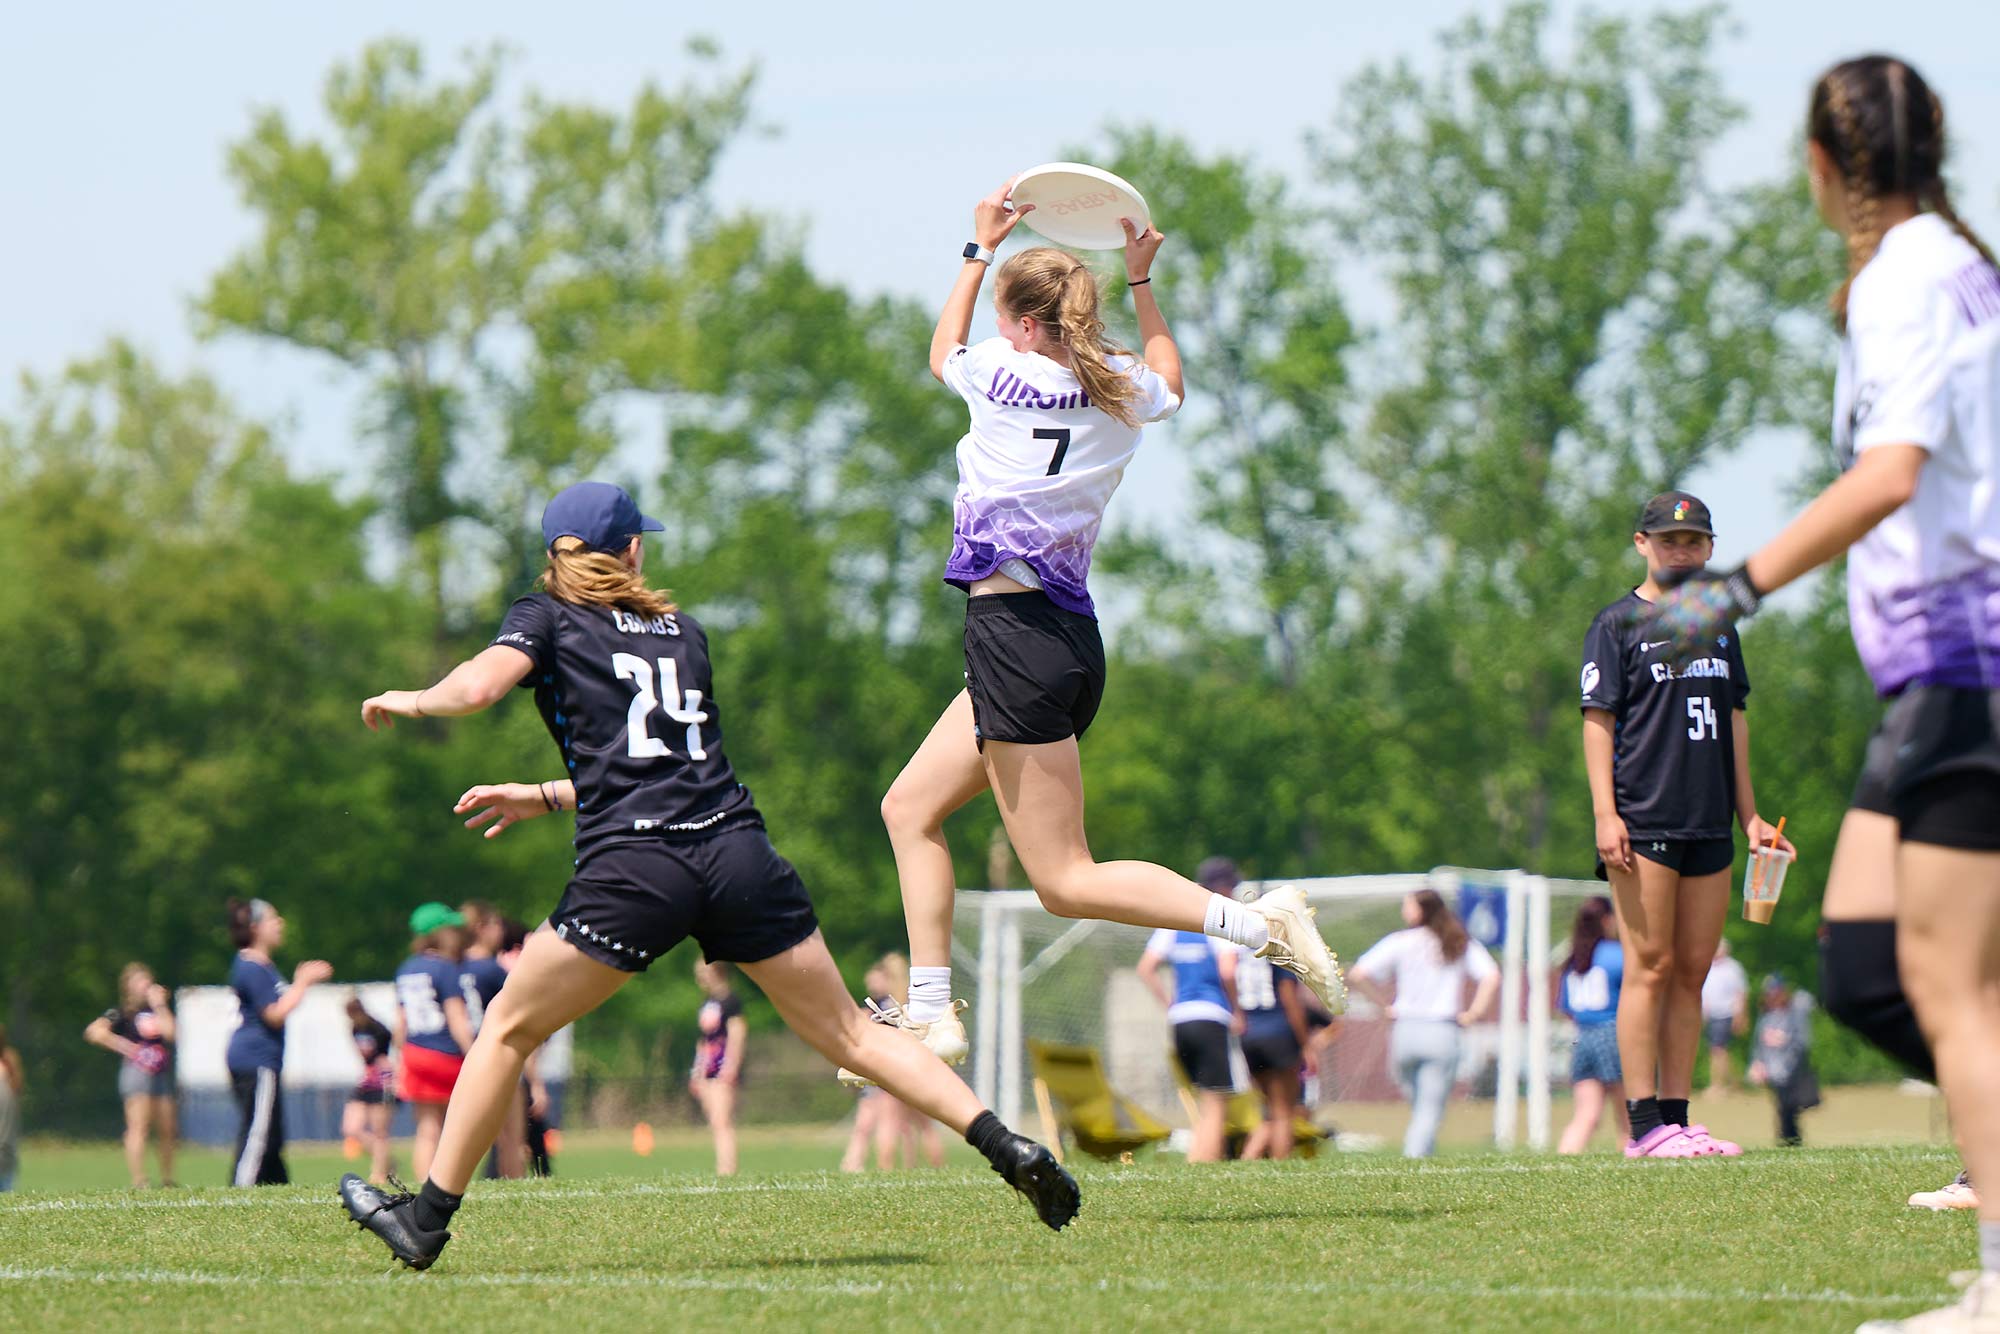 Action shot of a player jumping and catching a frisbee in mid air